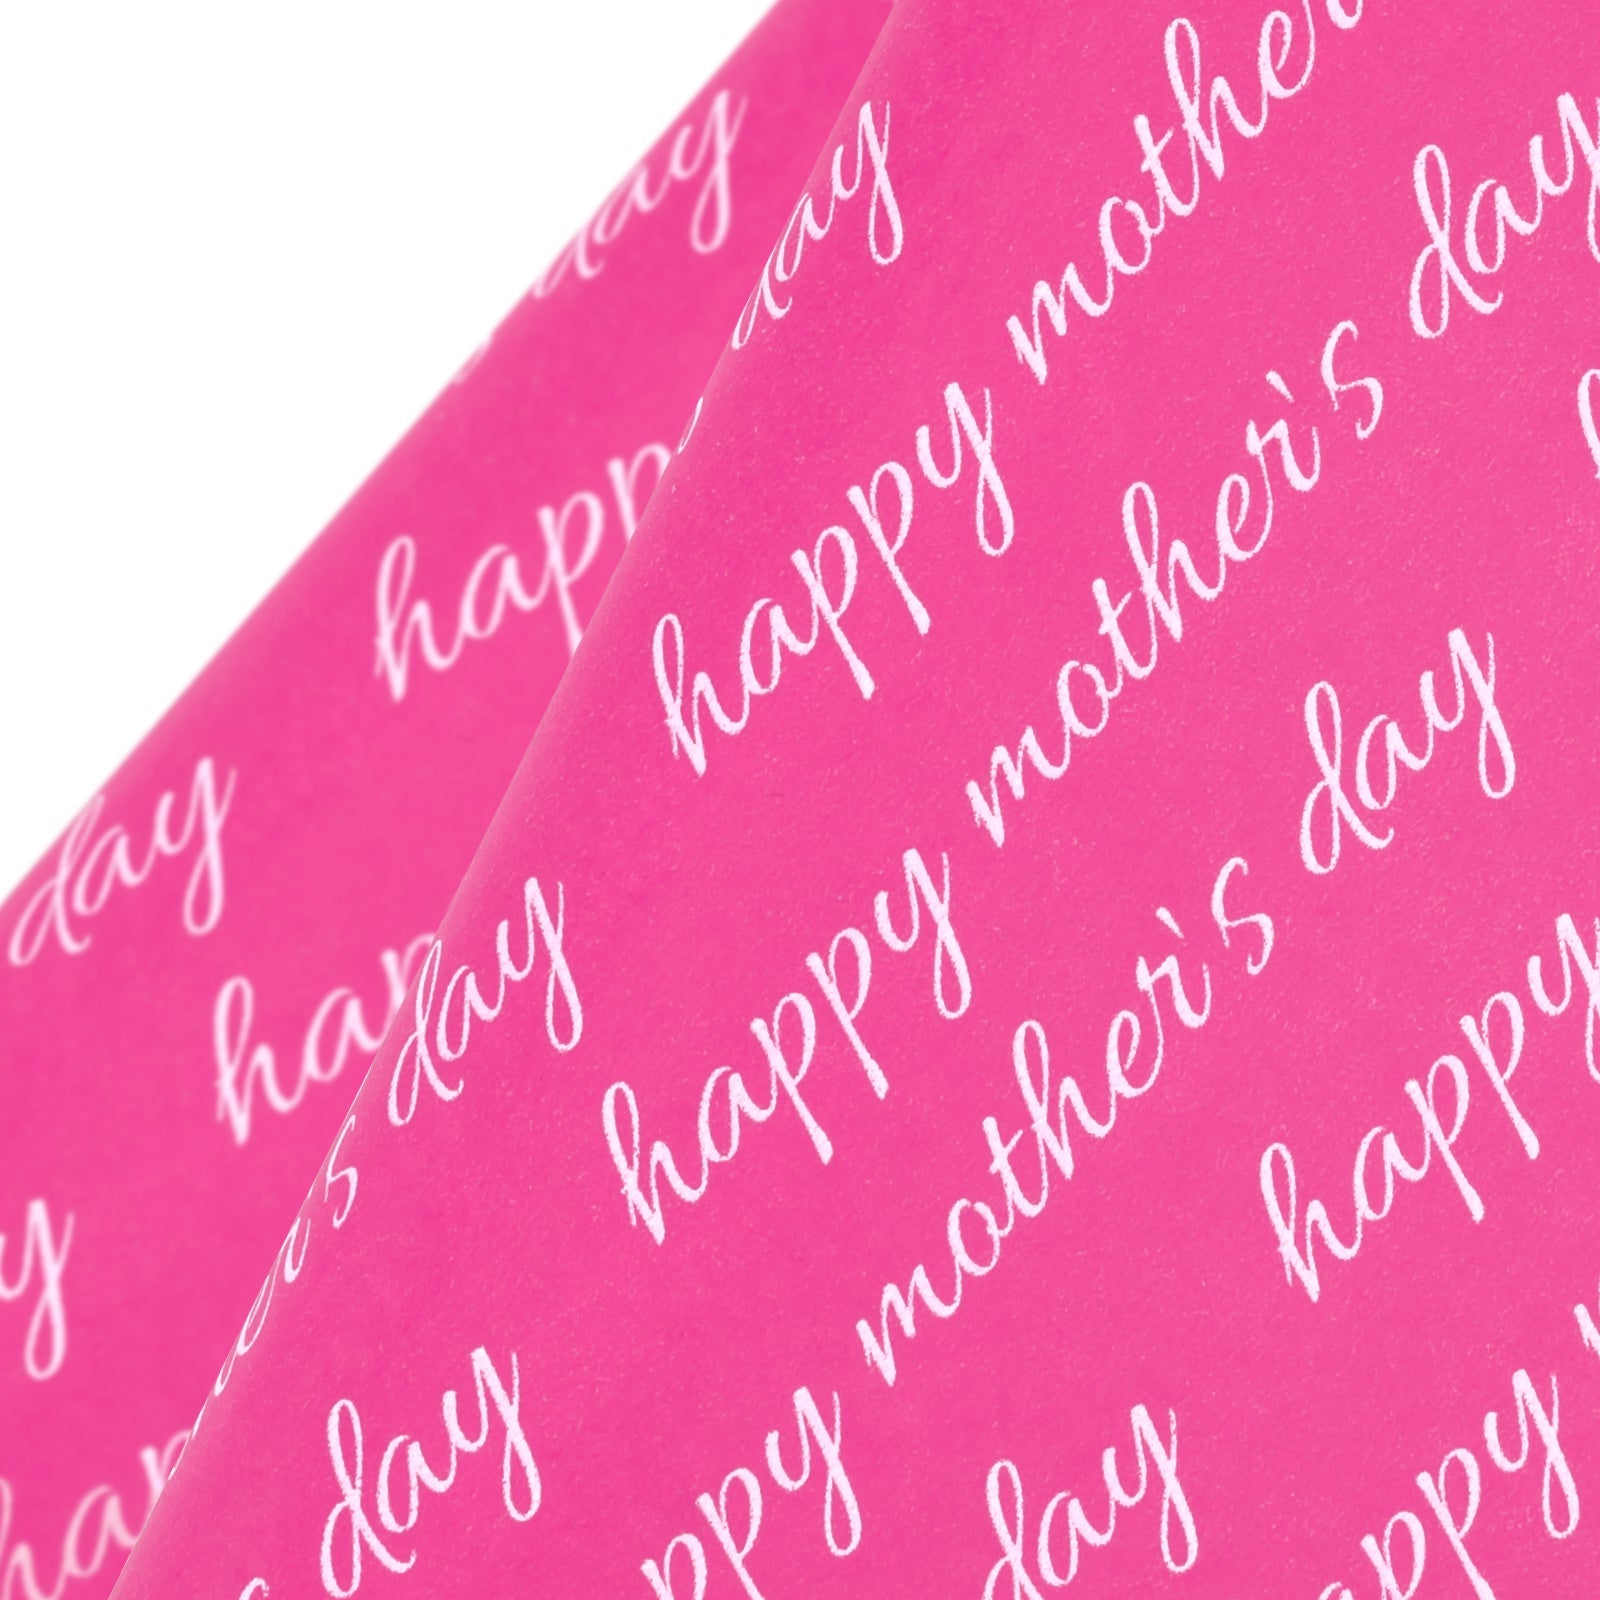 Gift Wrapping Tissue Paper - 25 Sheets Pink and White Happy Mother's Day Design Gift Wrap Paper Bulk for Packing, DIY Crafts - 19.7x27.5 inch